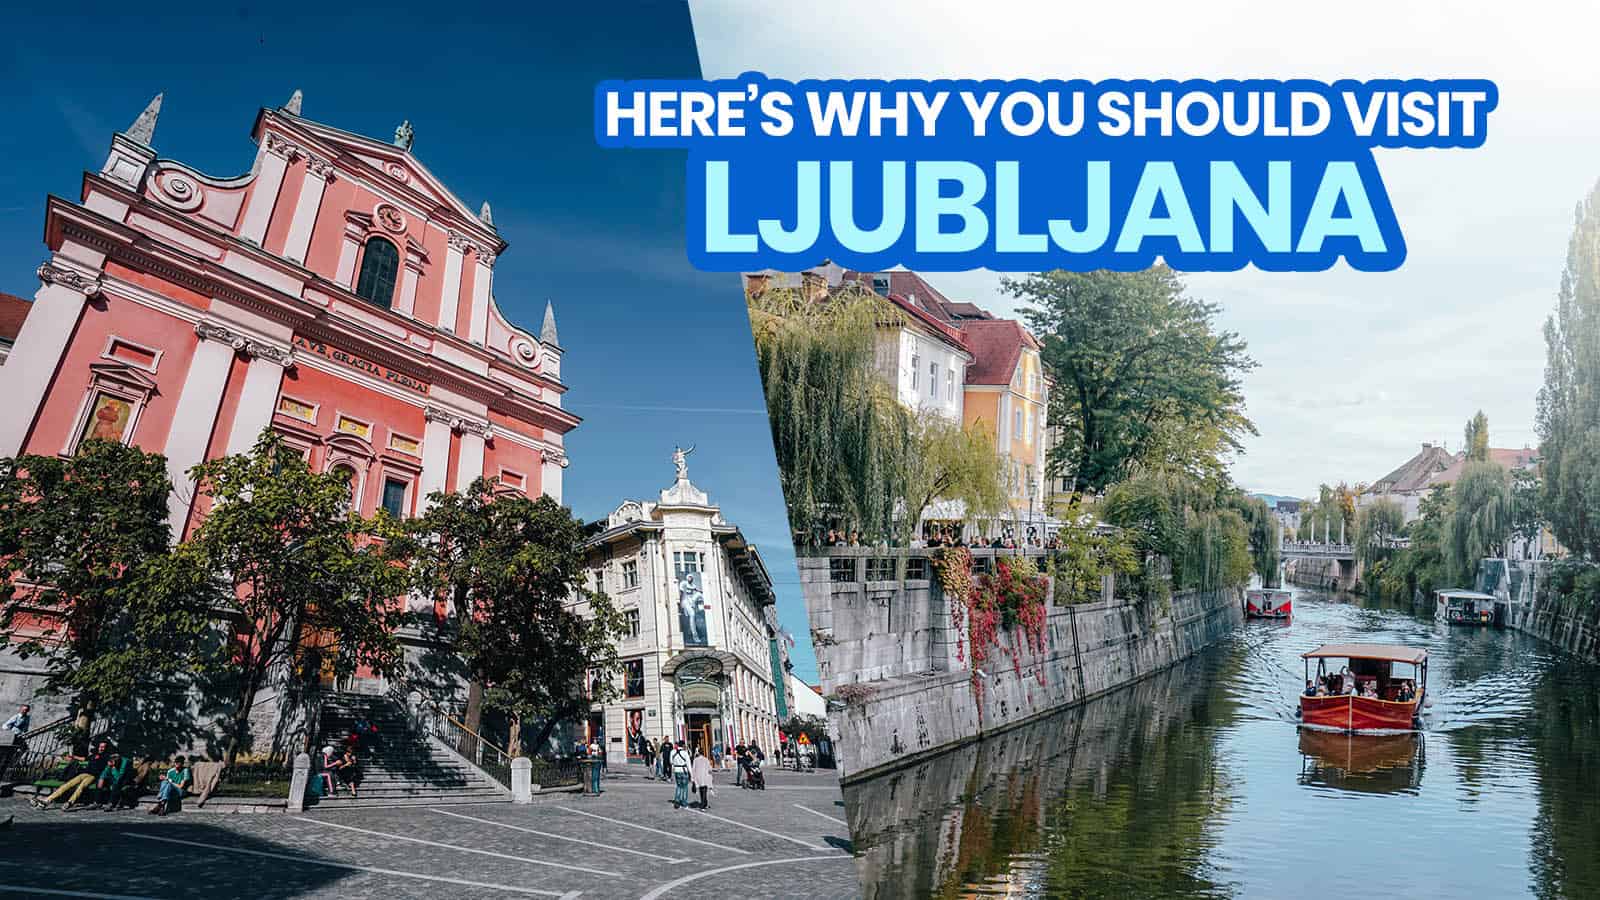 LJUBLJANA: 25 Best Things to Do & Places to Visit